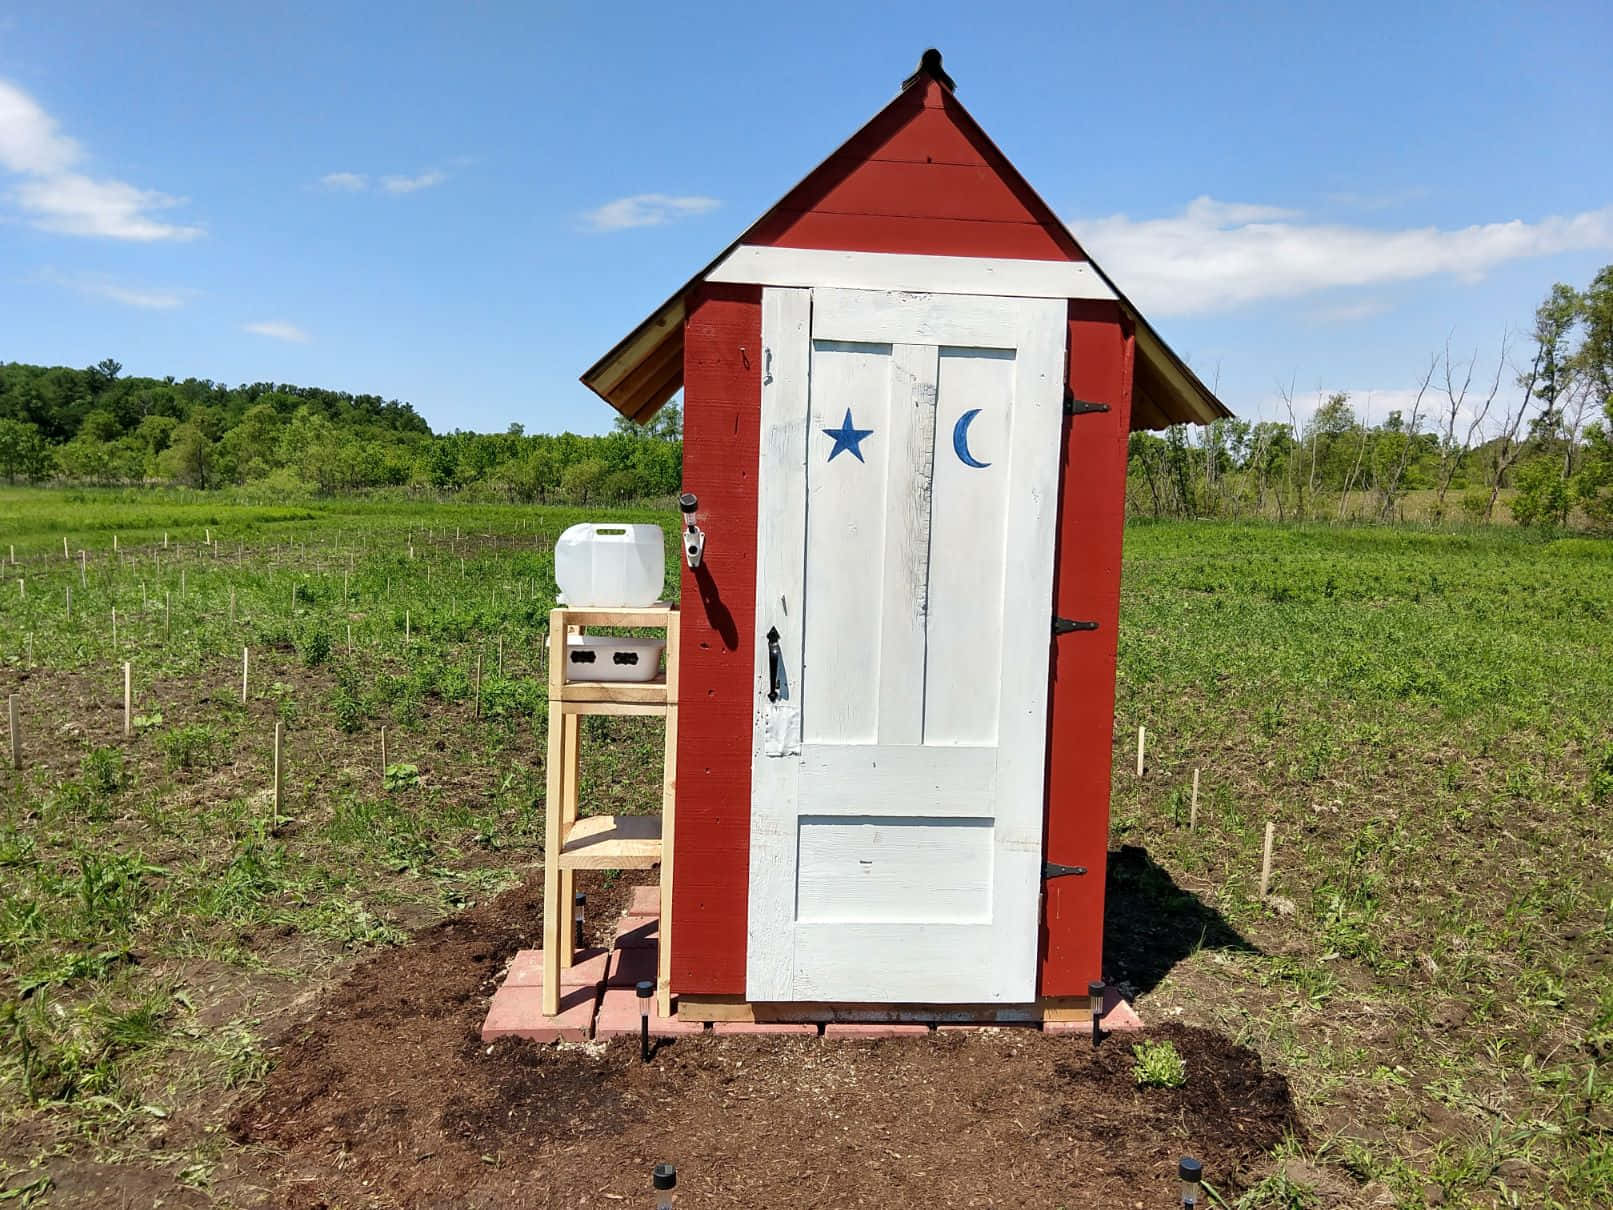 A charming outhouse in the countryside